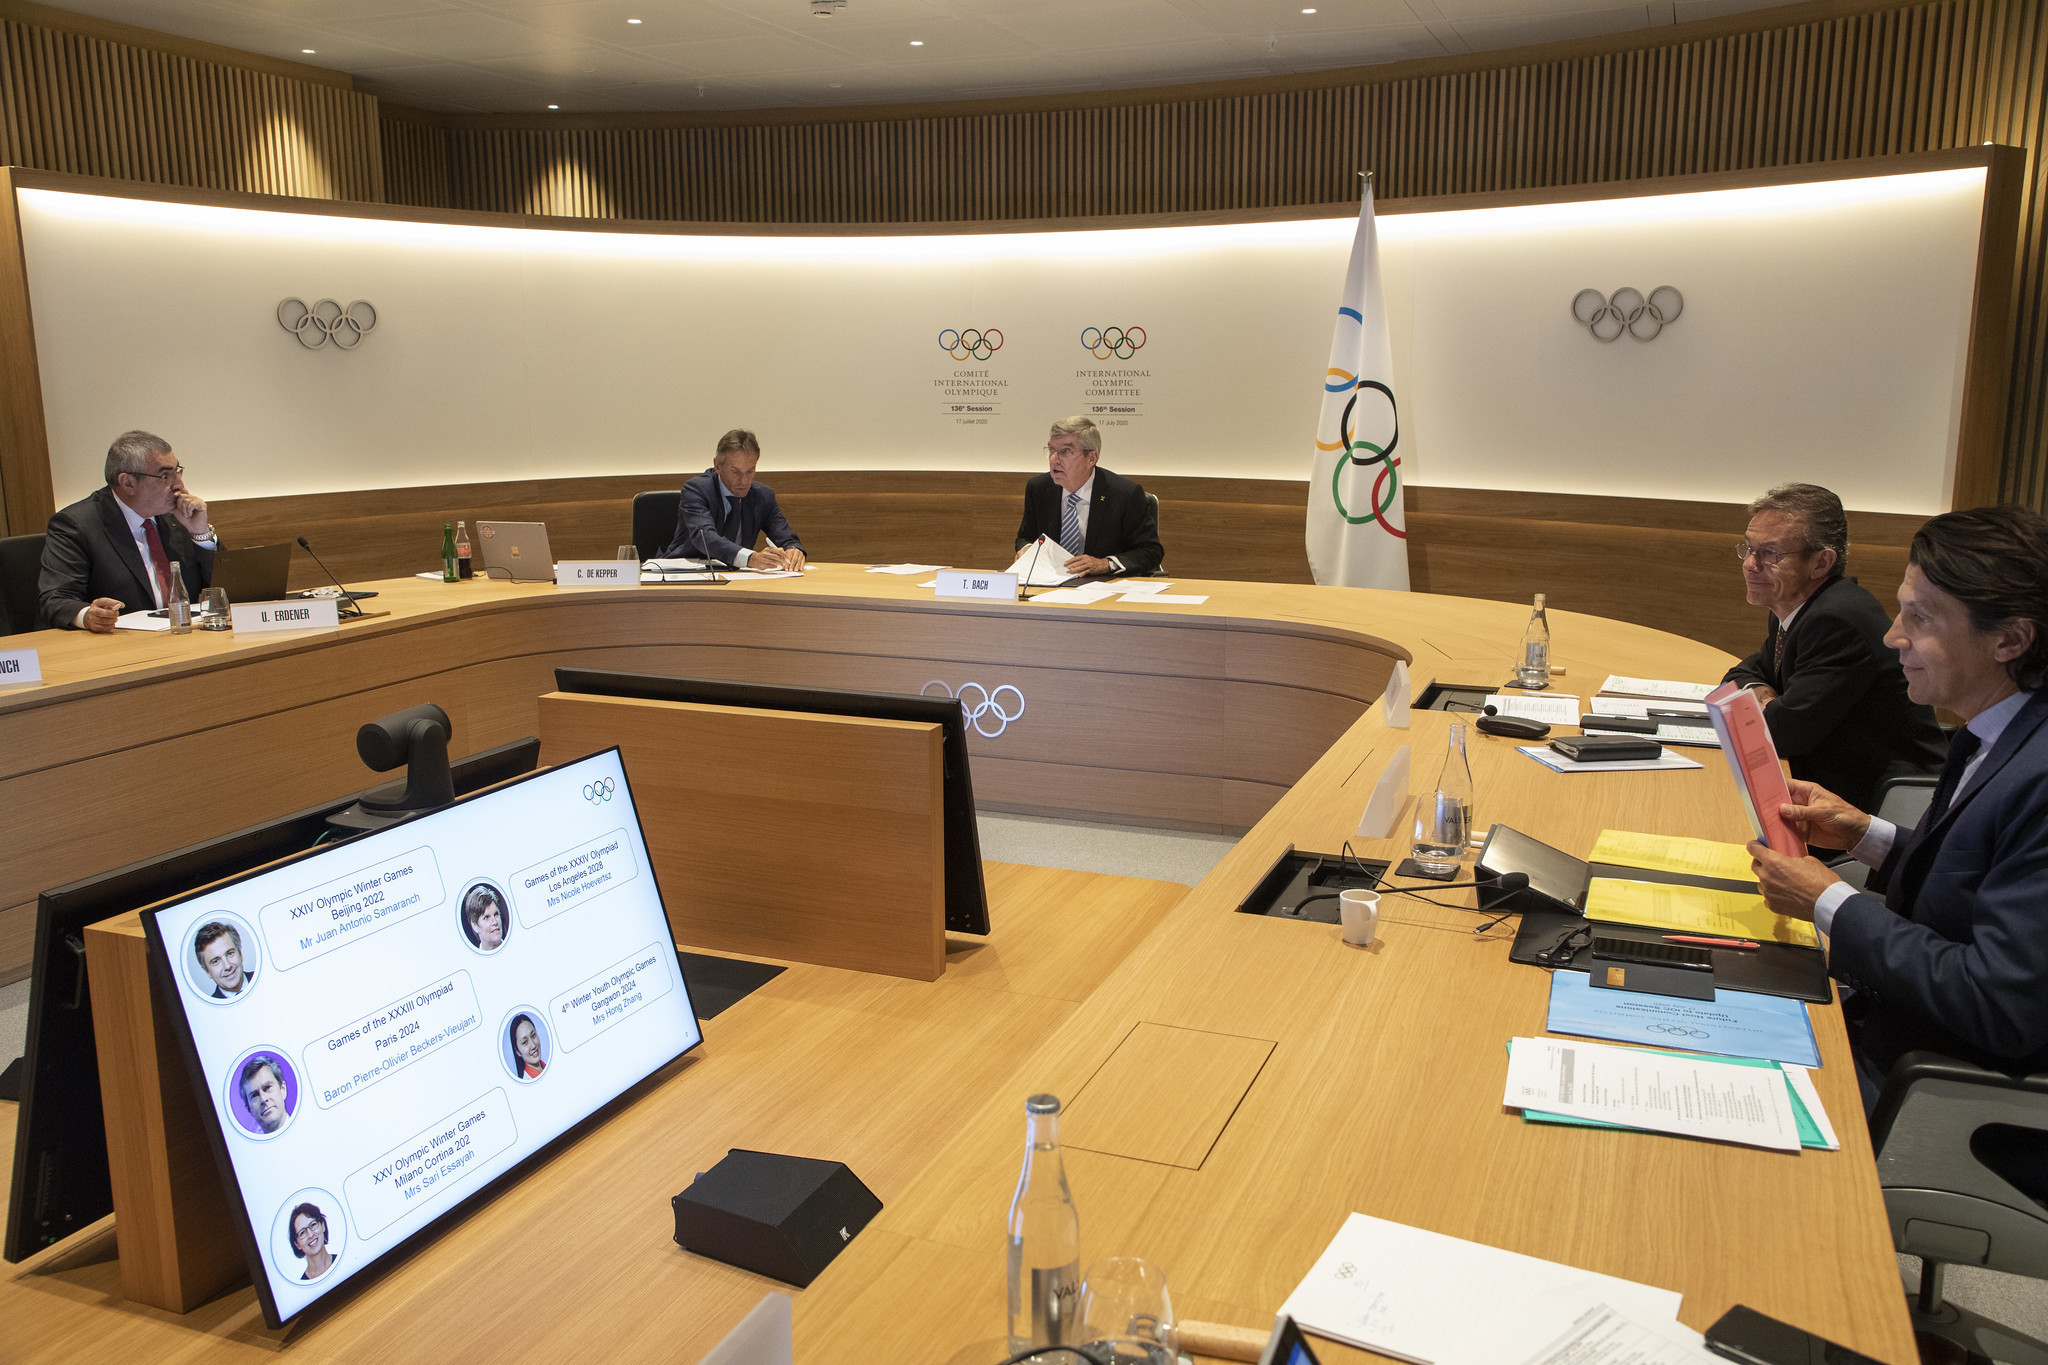 Thomas Bach confirmed he would seek re-election during the IOC's first virtual Session ©IOC